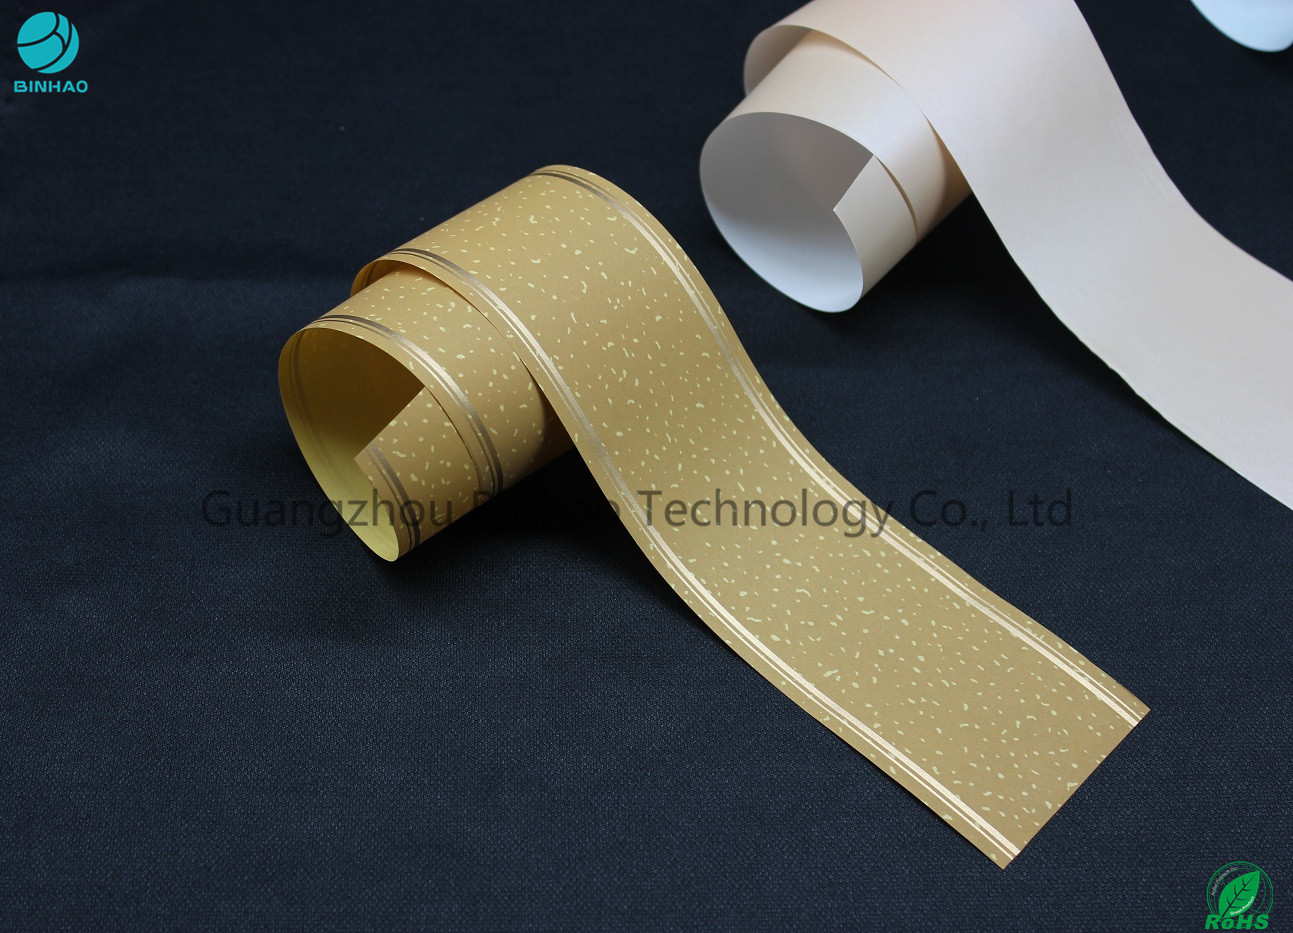 33g Customized Tipping Base Paper With Hot Stamping Logo Pattern / Cigarette Filter Packaging